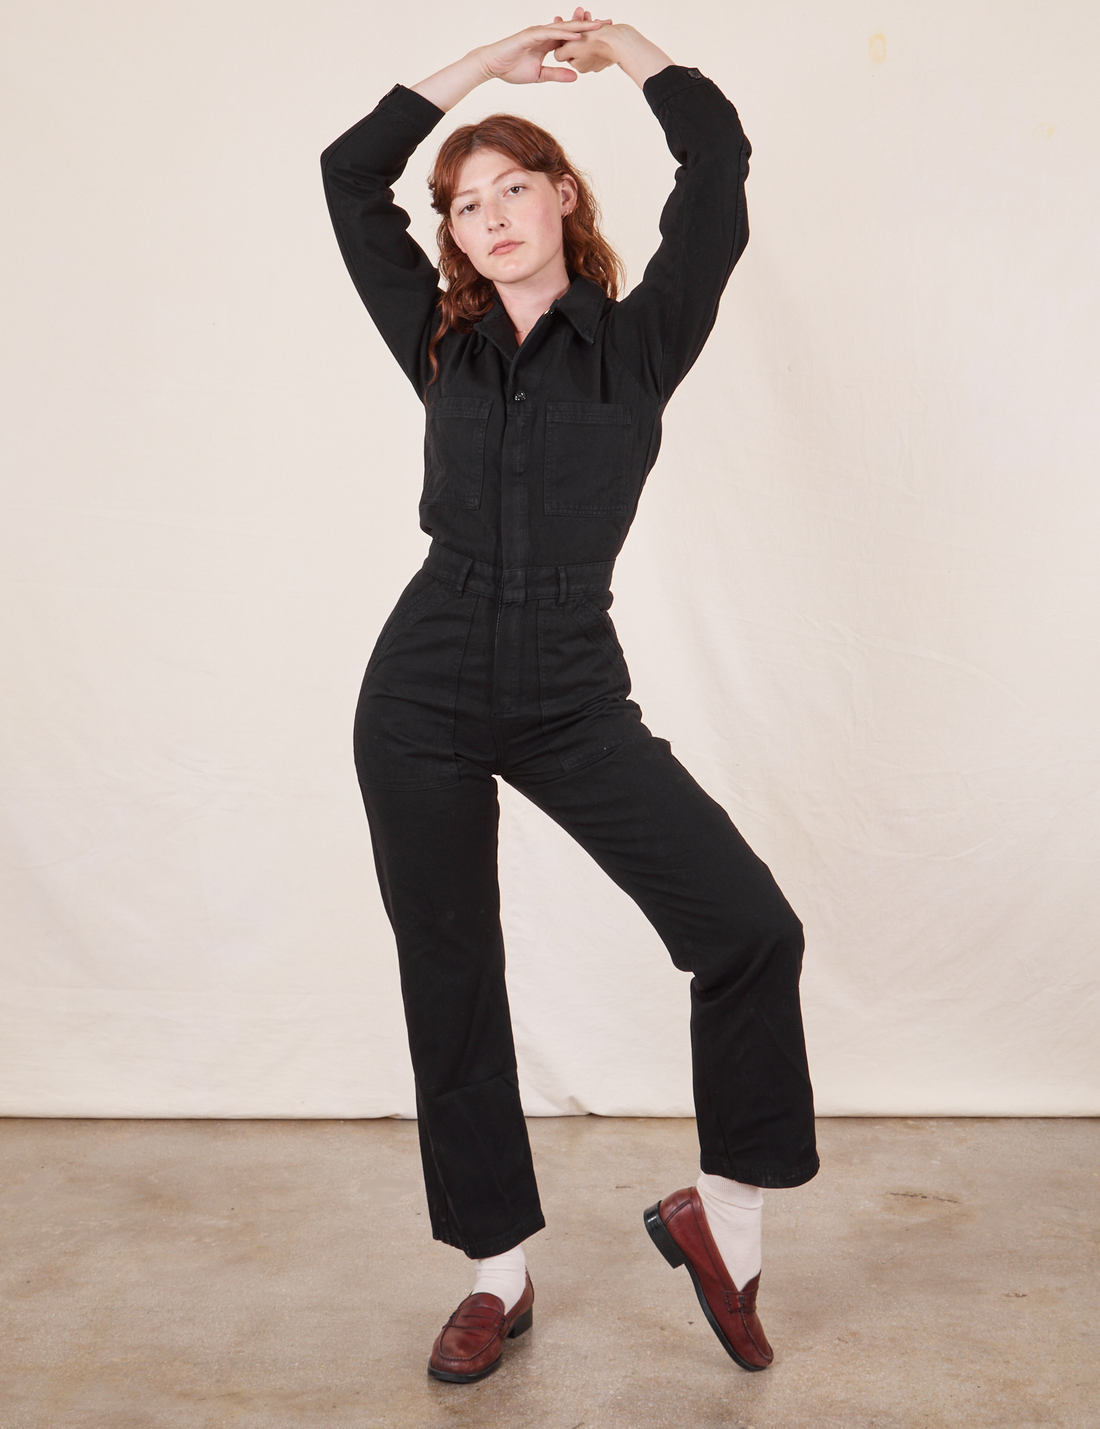 Alex is wearing Everyday Jumpsuit in Basic Black